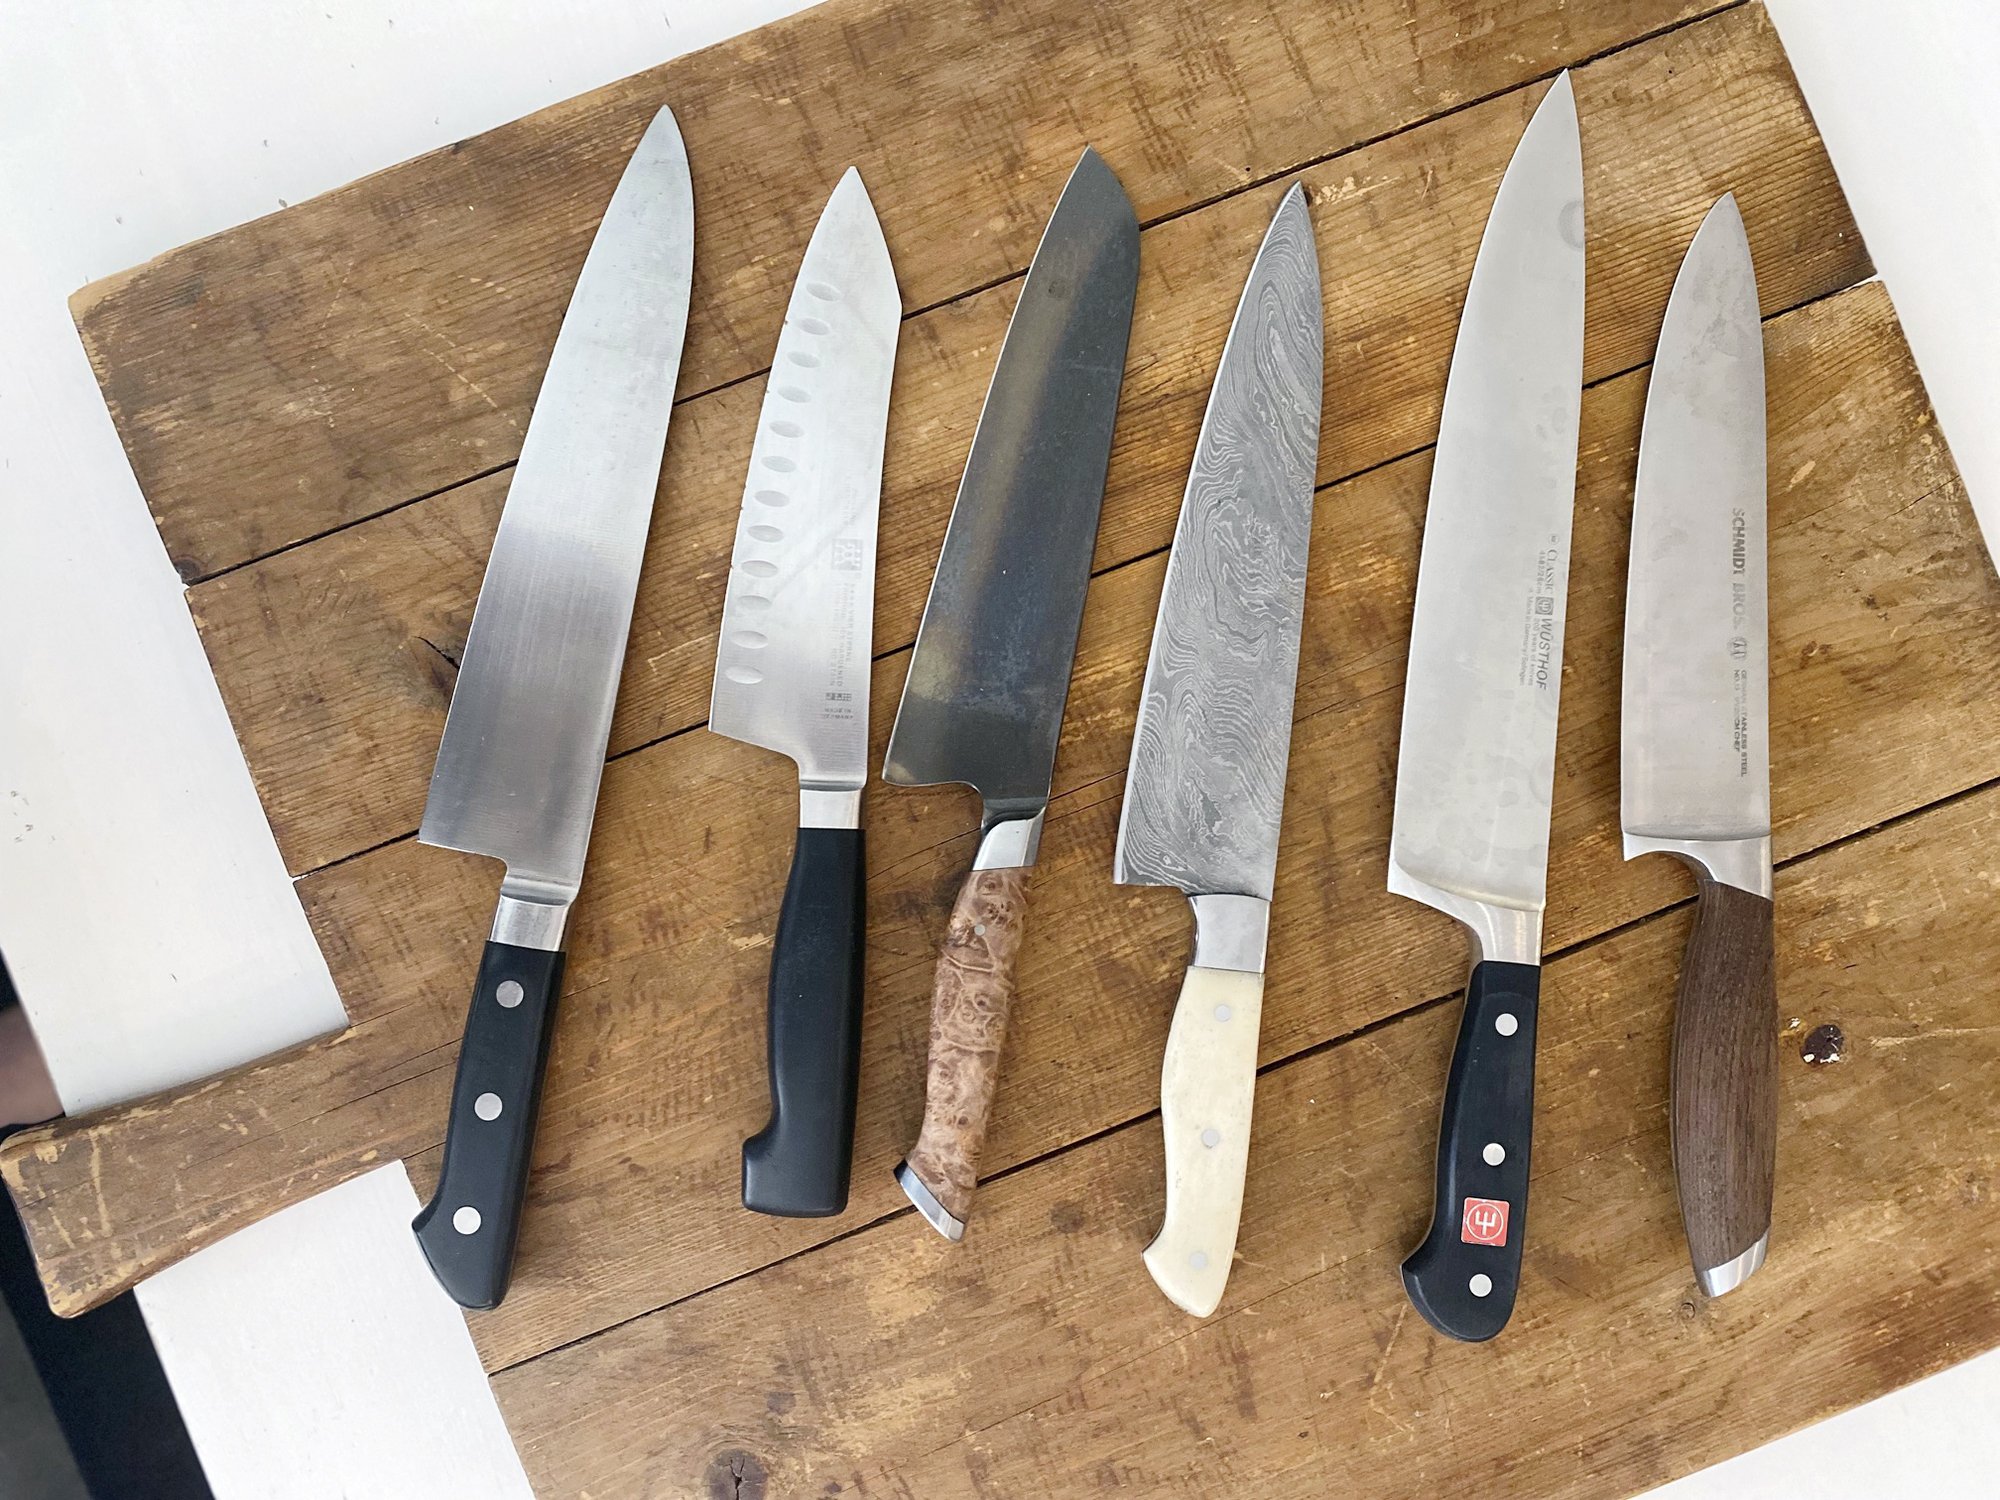 Japanese vs. German Knives: Which One Is Right for Your Kitchen